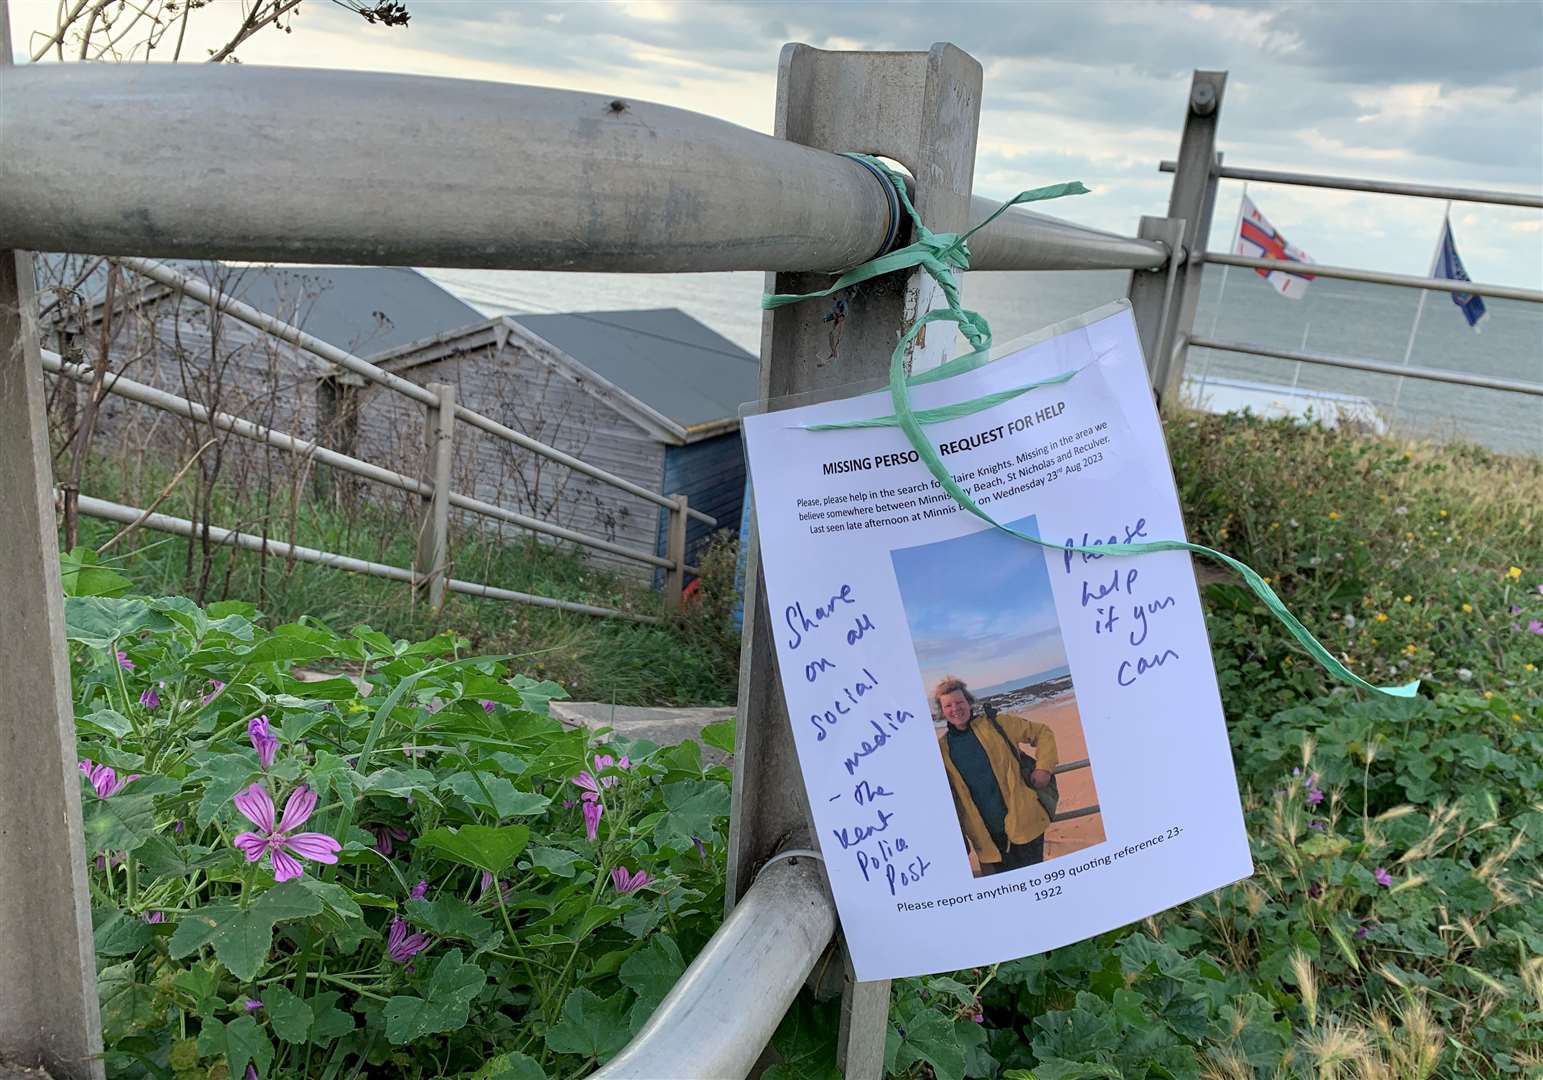 Missing persons posters have been placed near to where Claire Knights went missing